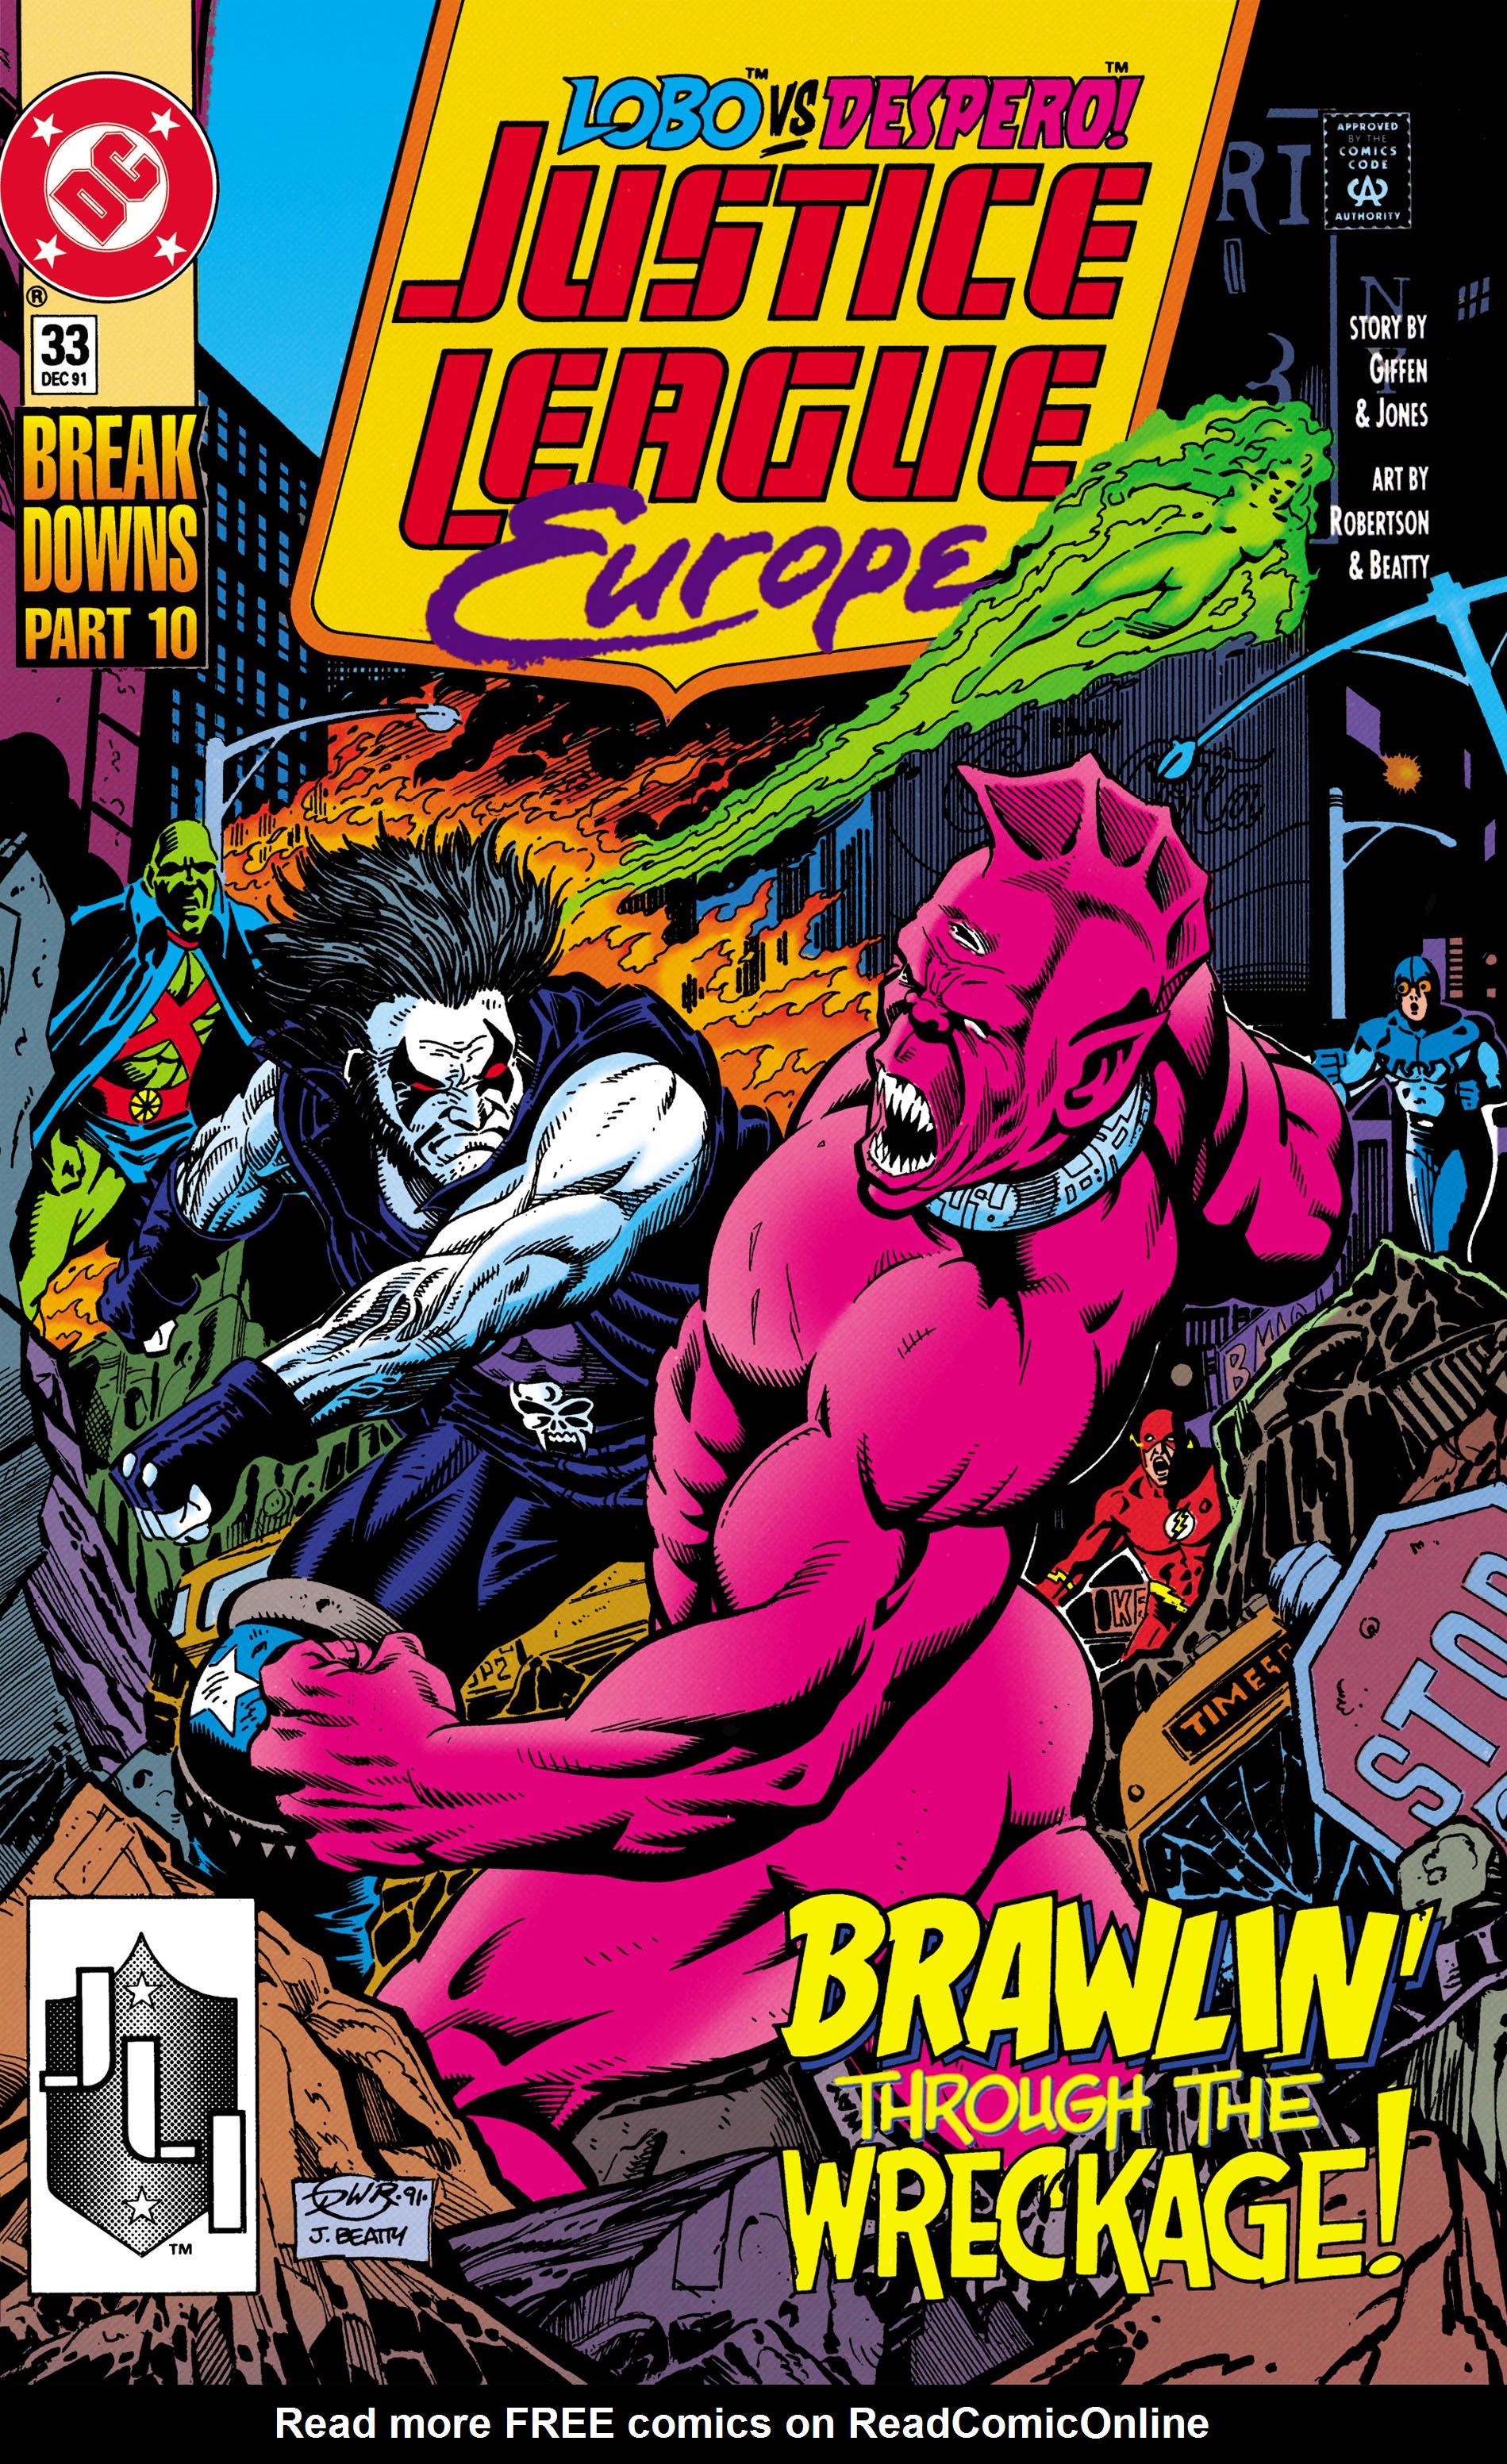 Read online Justice League Europe comic -  Issue #33 - 1